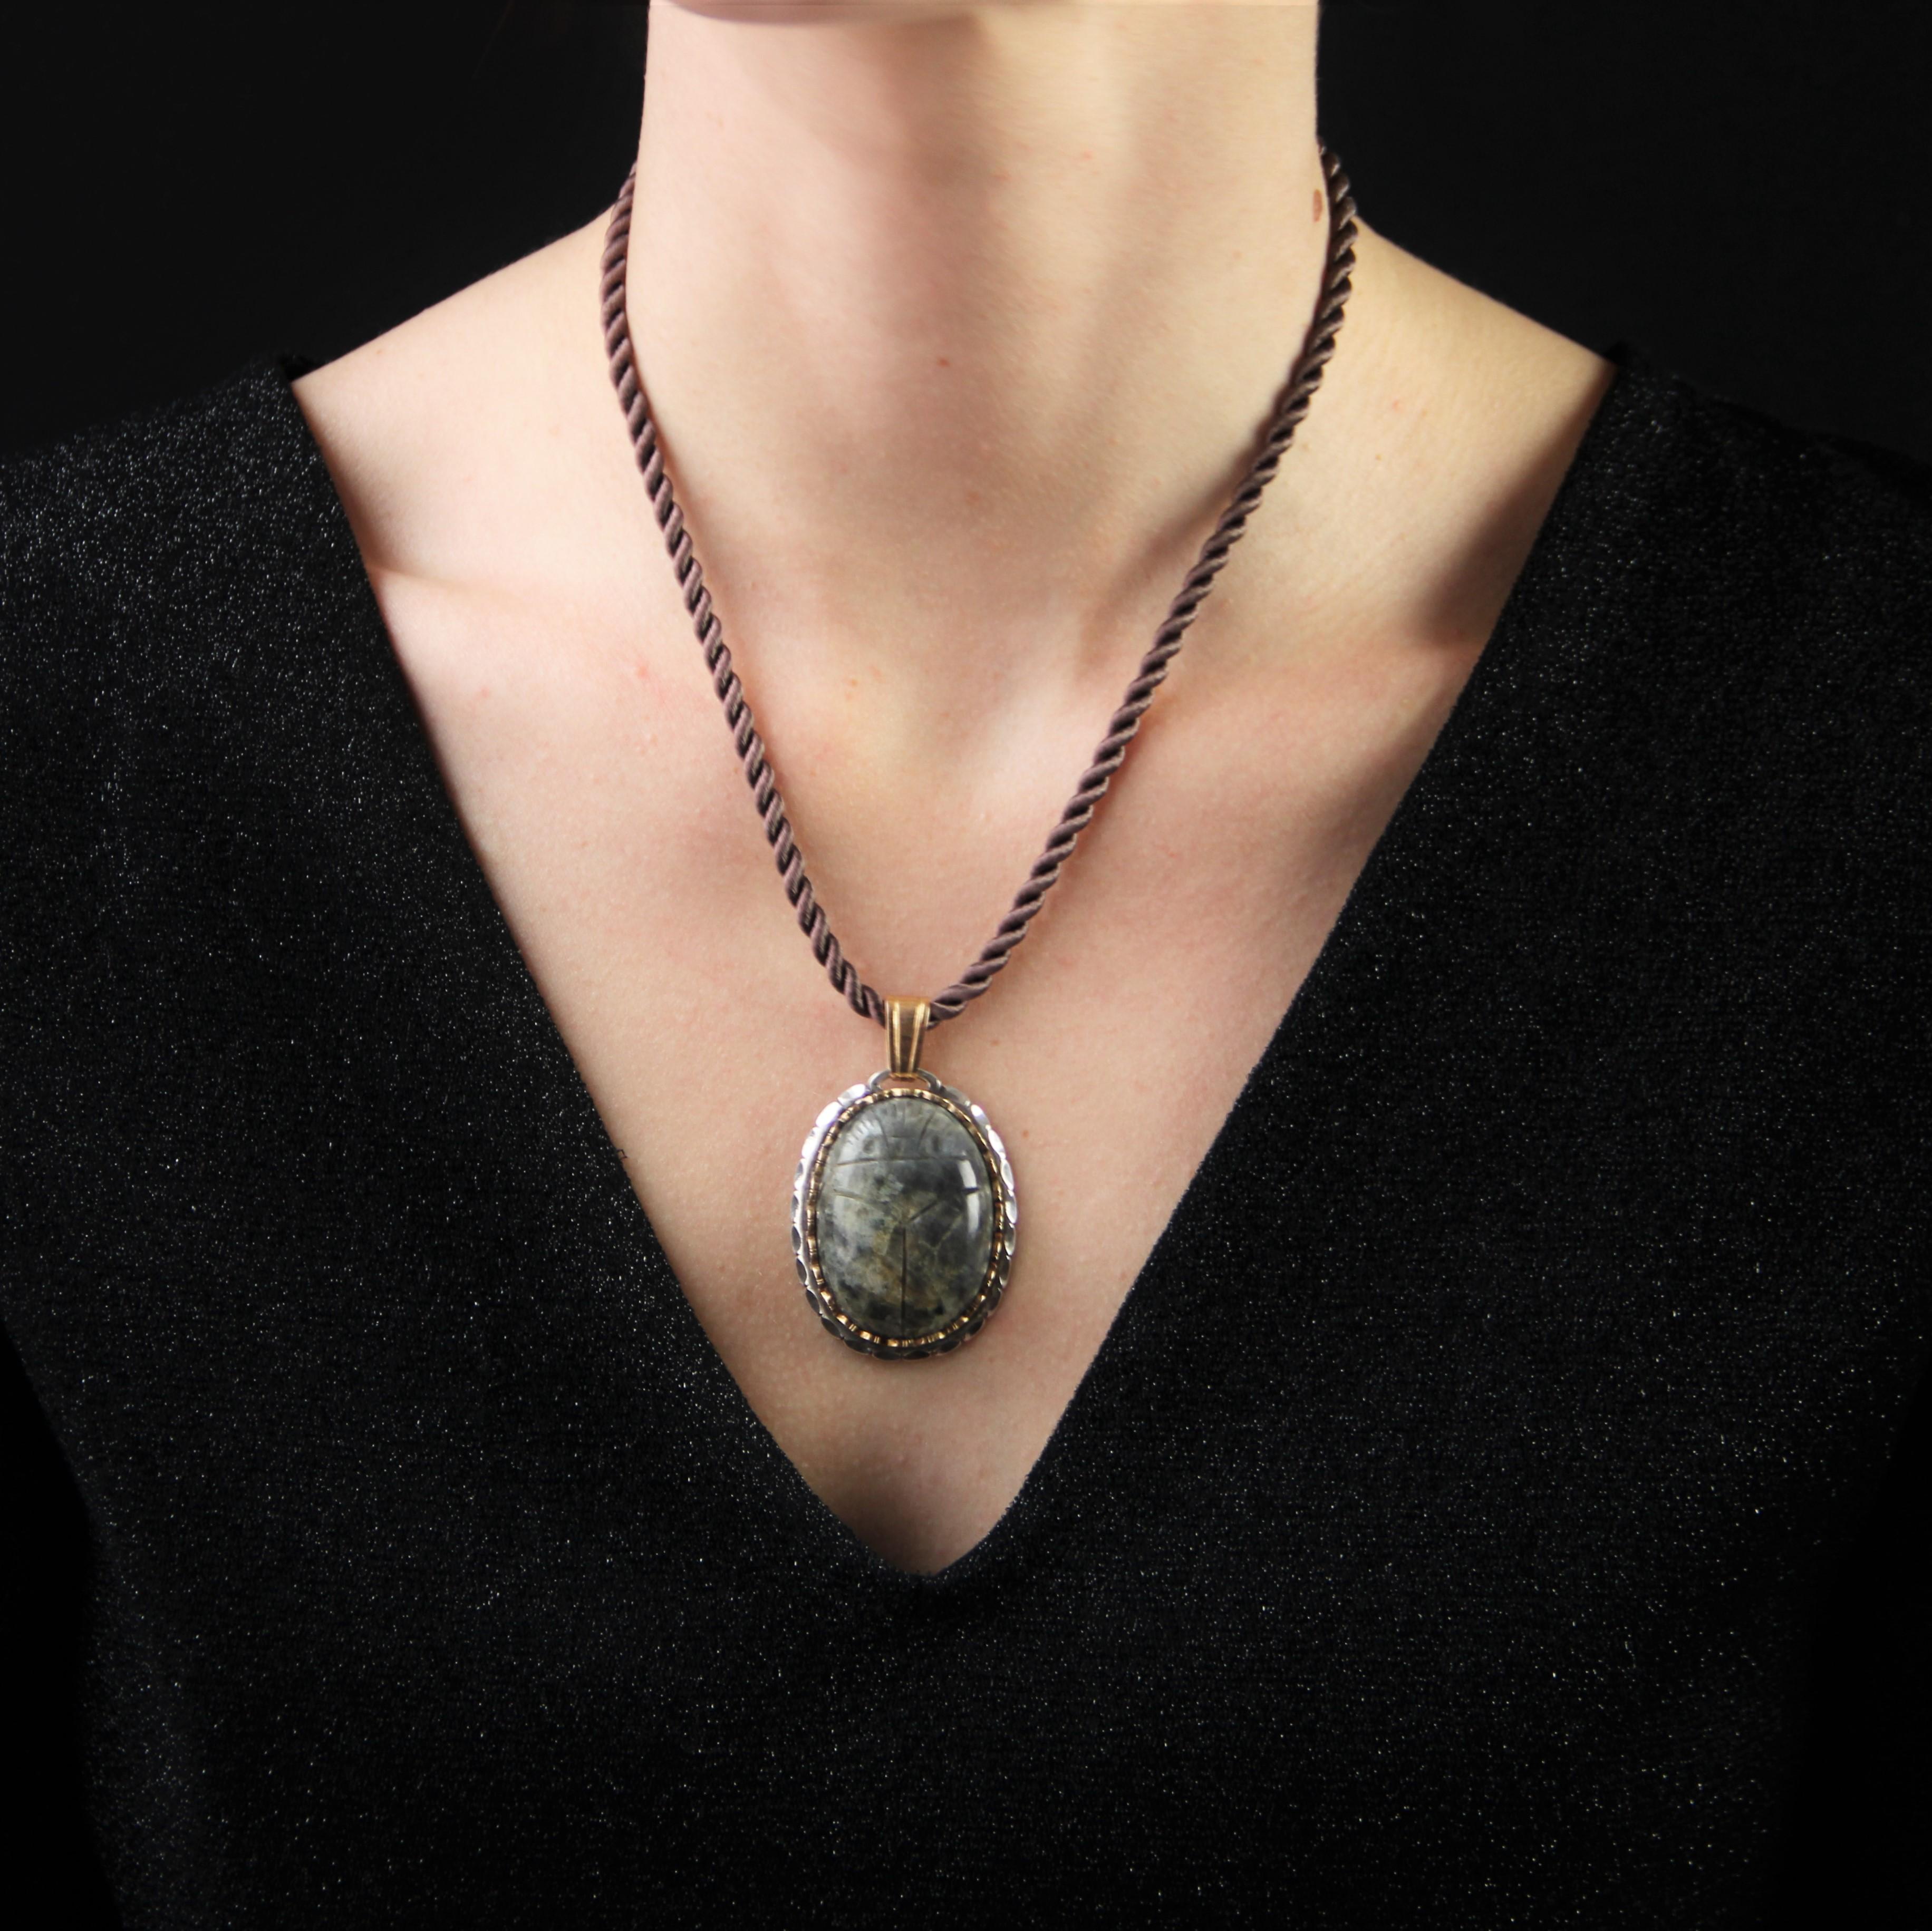 Silver and gold pendant.
Important oval shape pendant, it is set with a cabochon of labradorite engraved with a beetle pattern surrounded by a gold pattern such as a corolla, and a silver drape. The clasp is in yellow gold.
Height : 5,5 cm